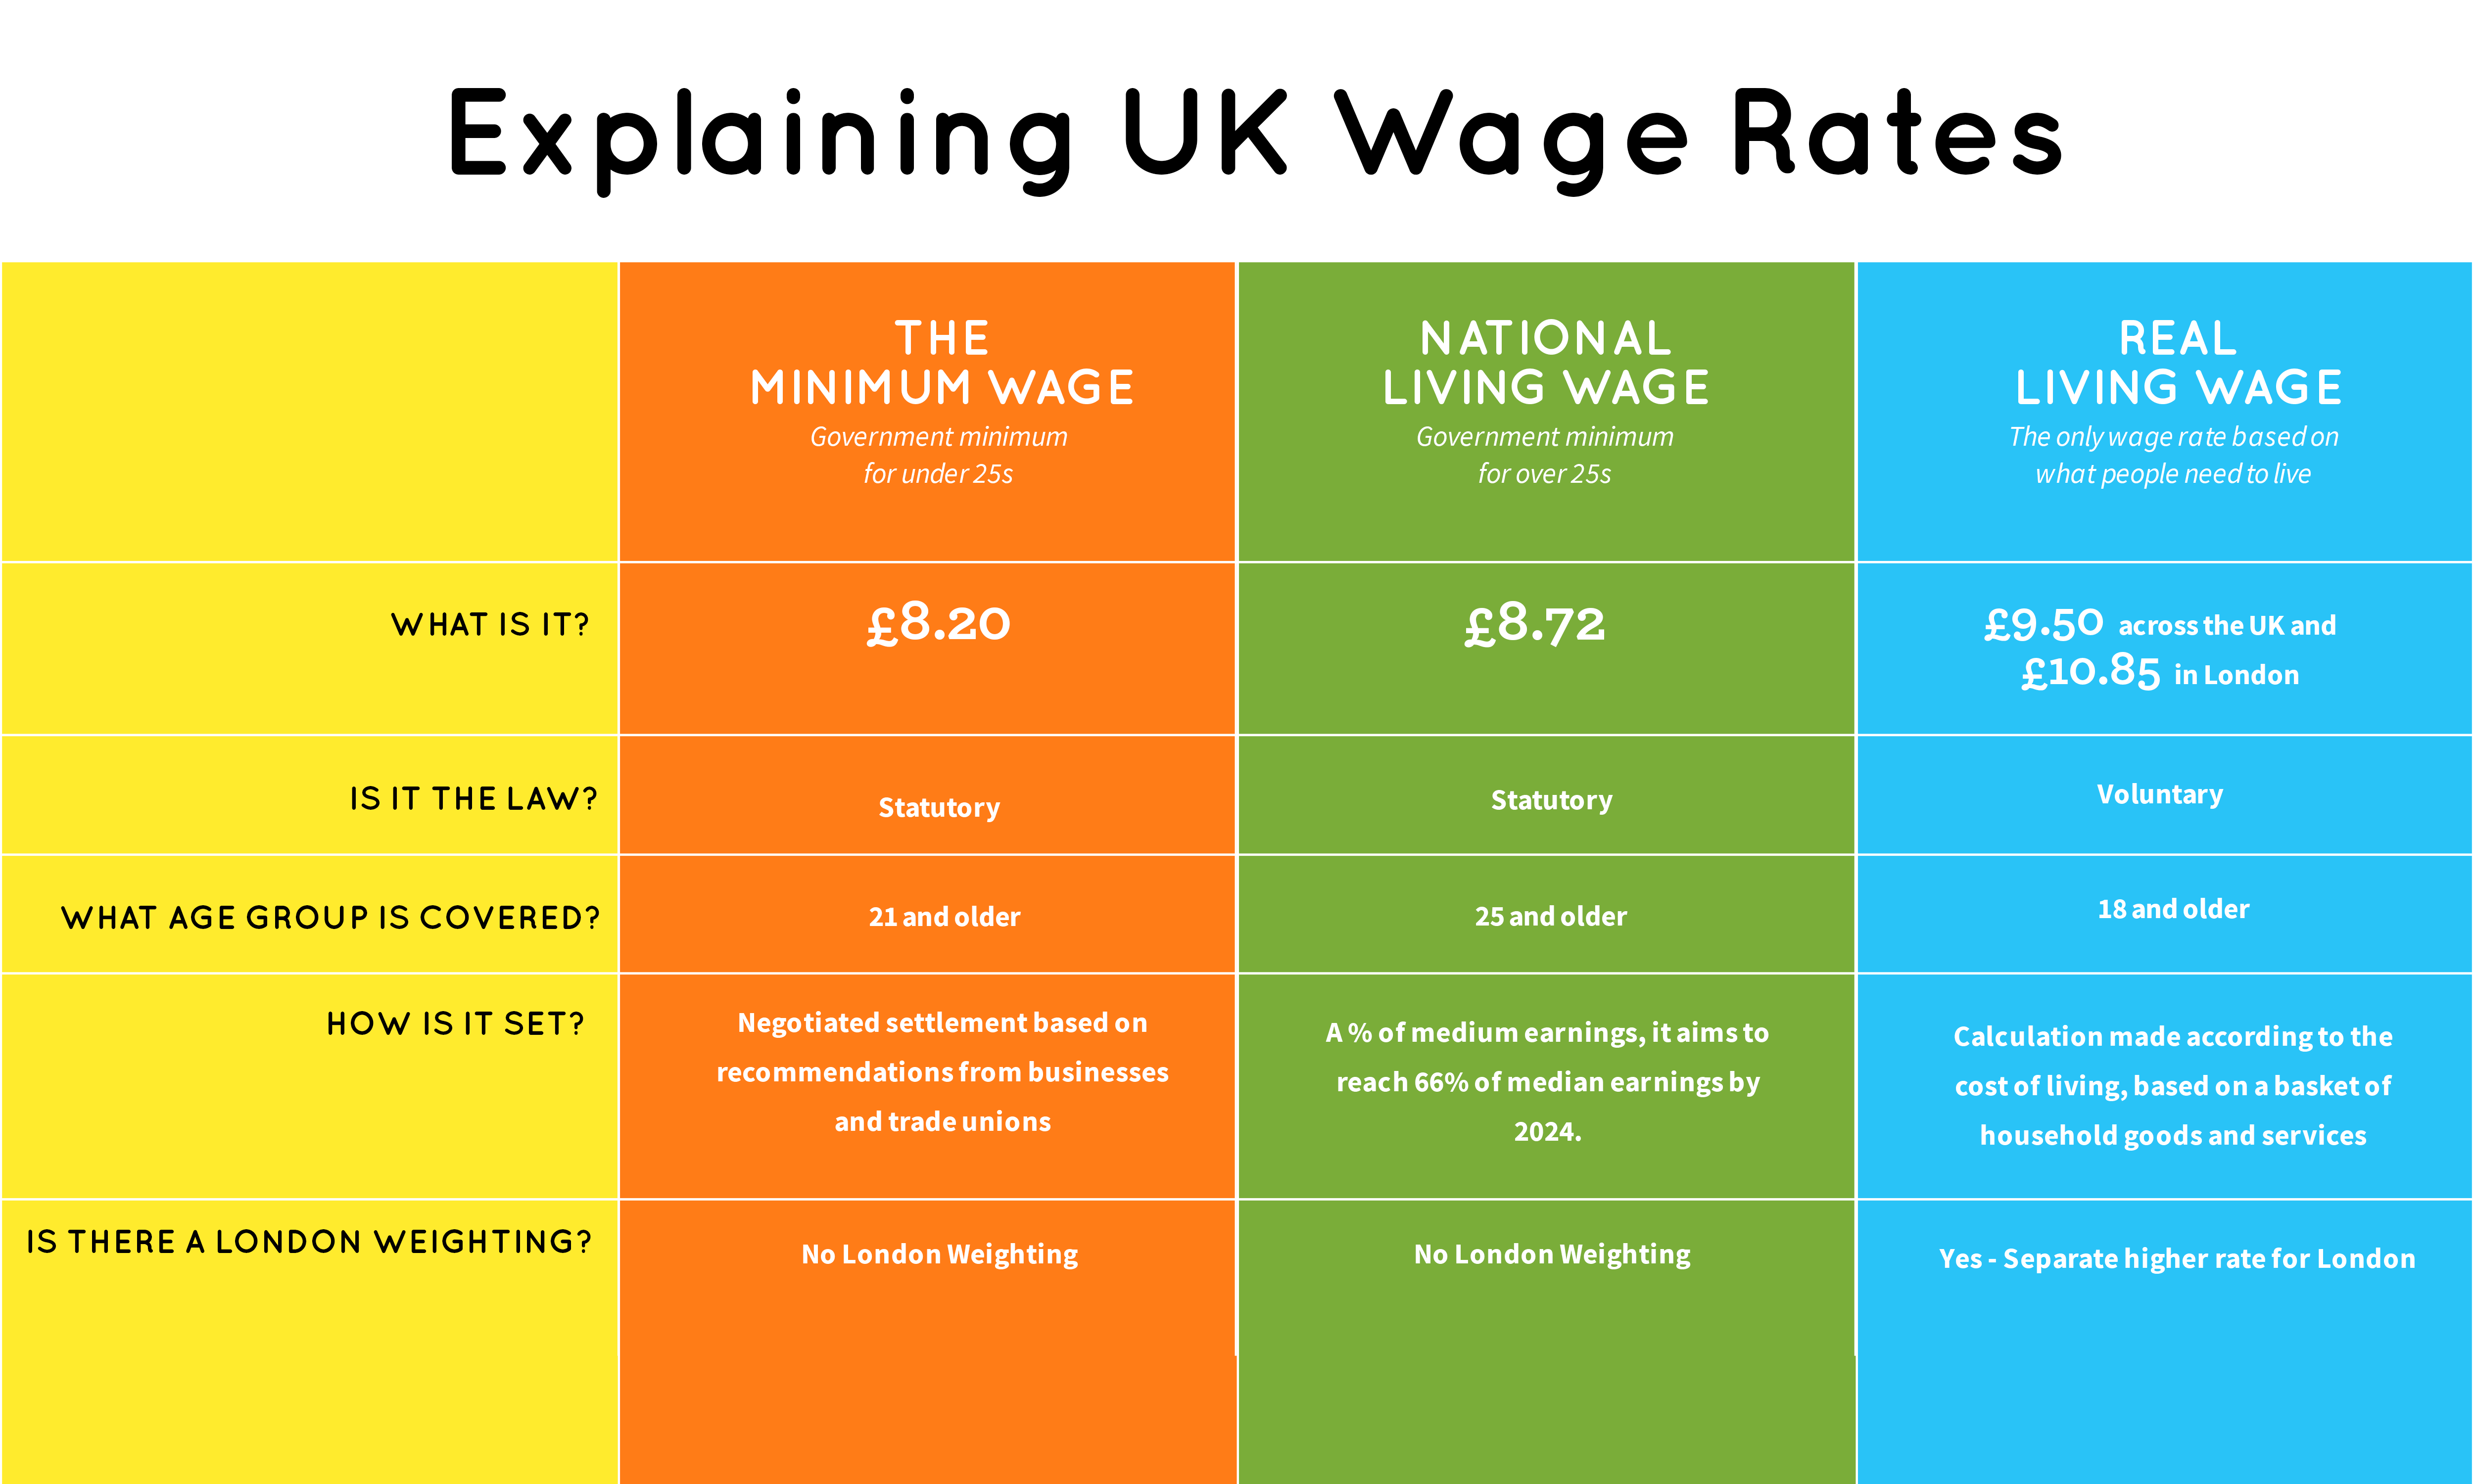 The new Living Wage rates for 2020/21 are out